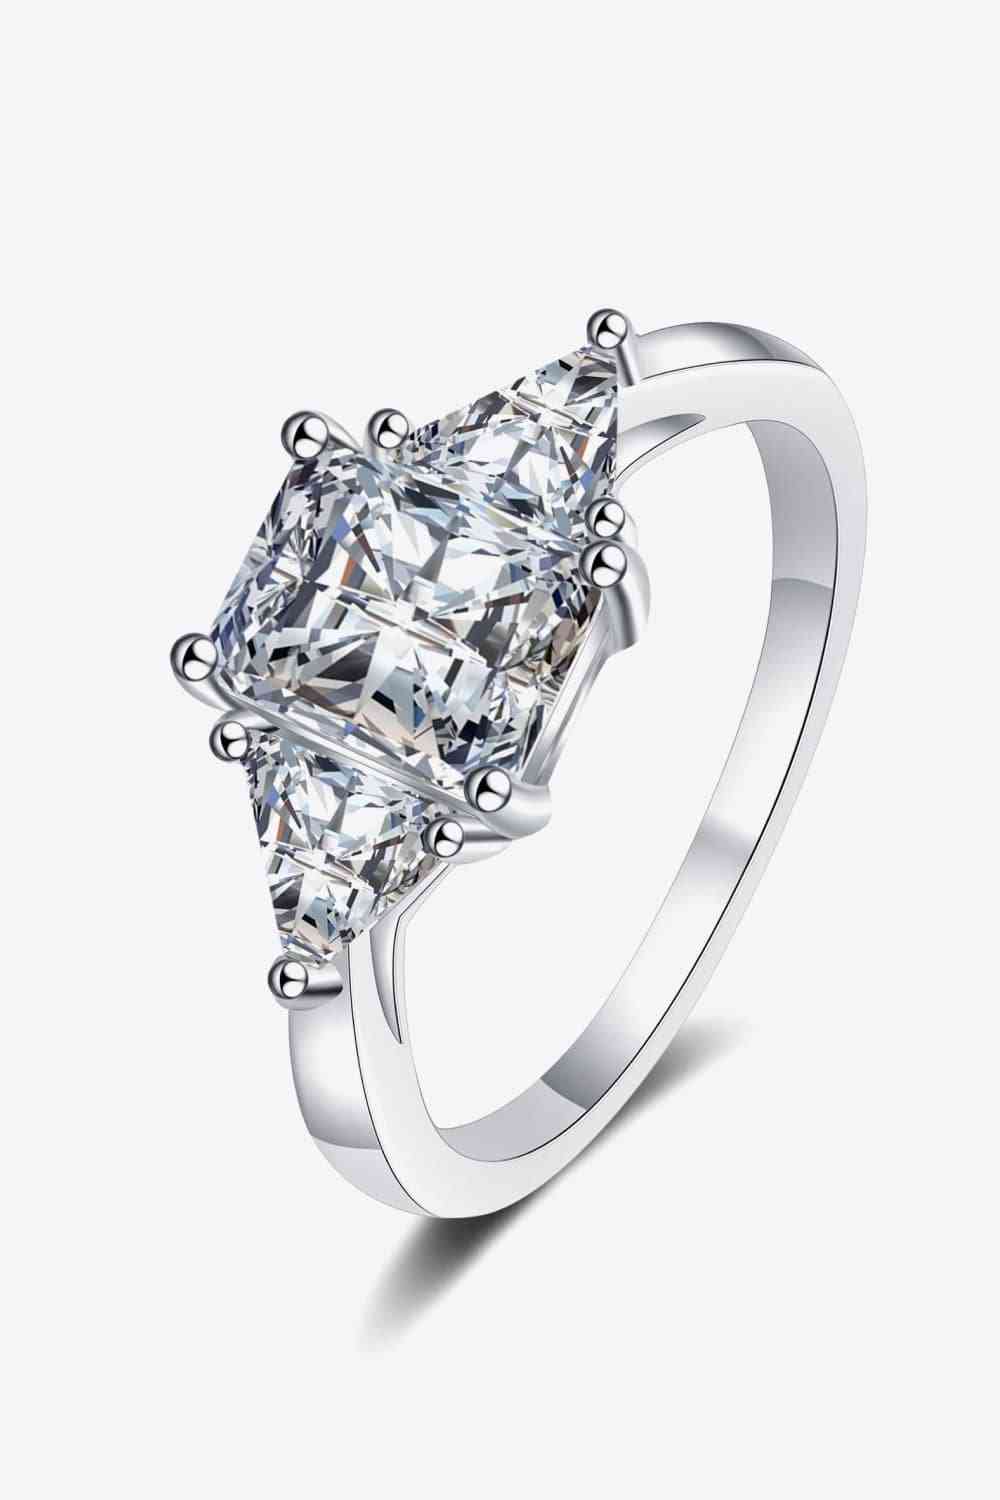 a ring with a princess cut diamond in the center